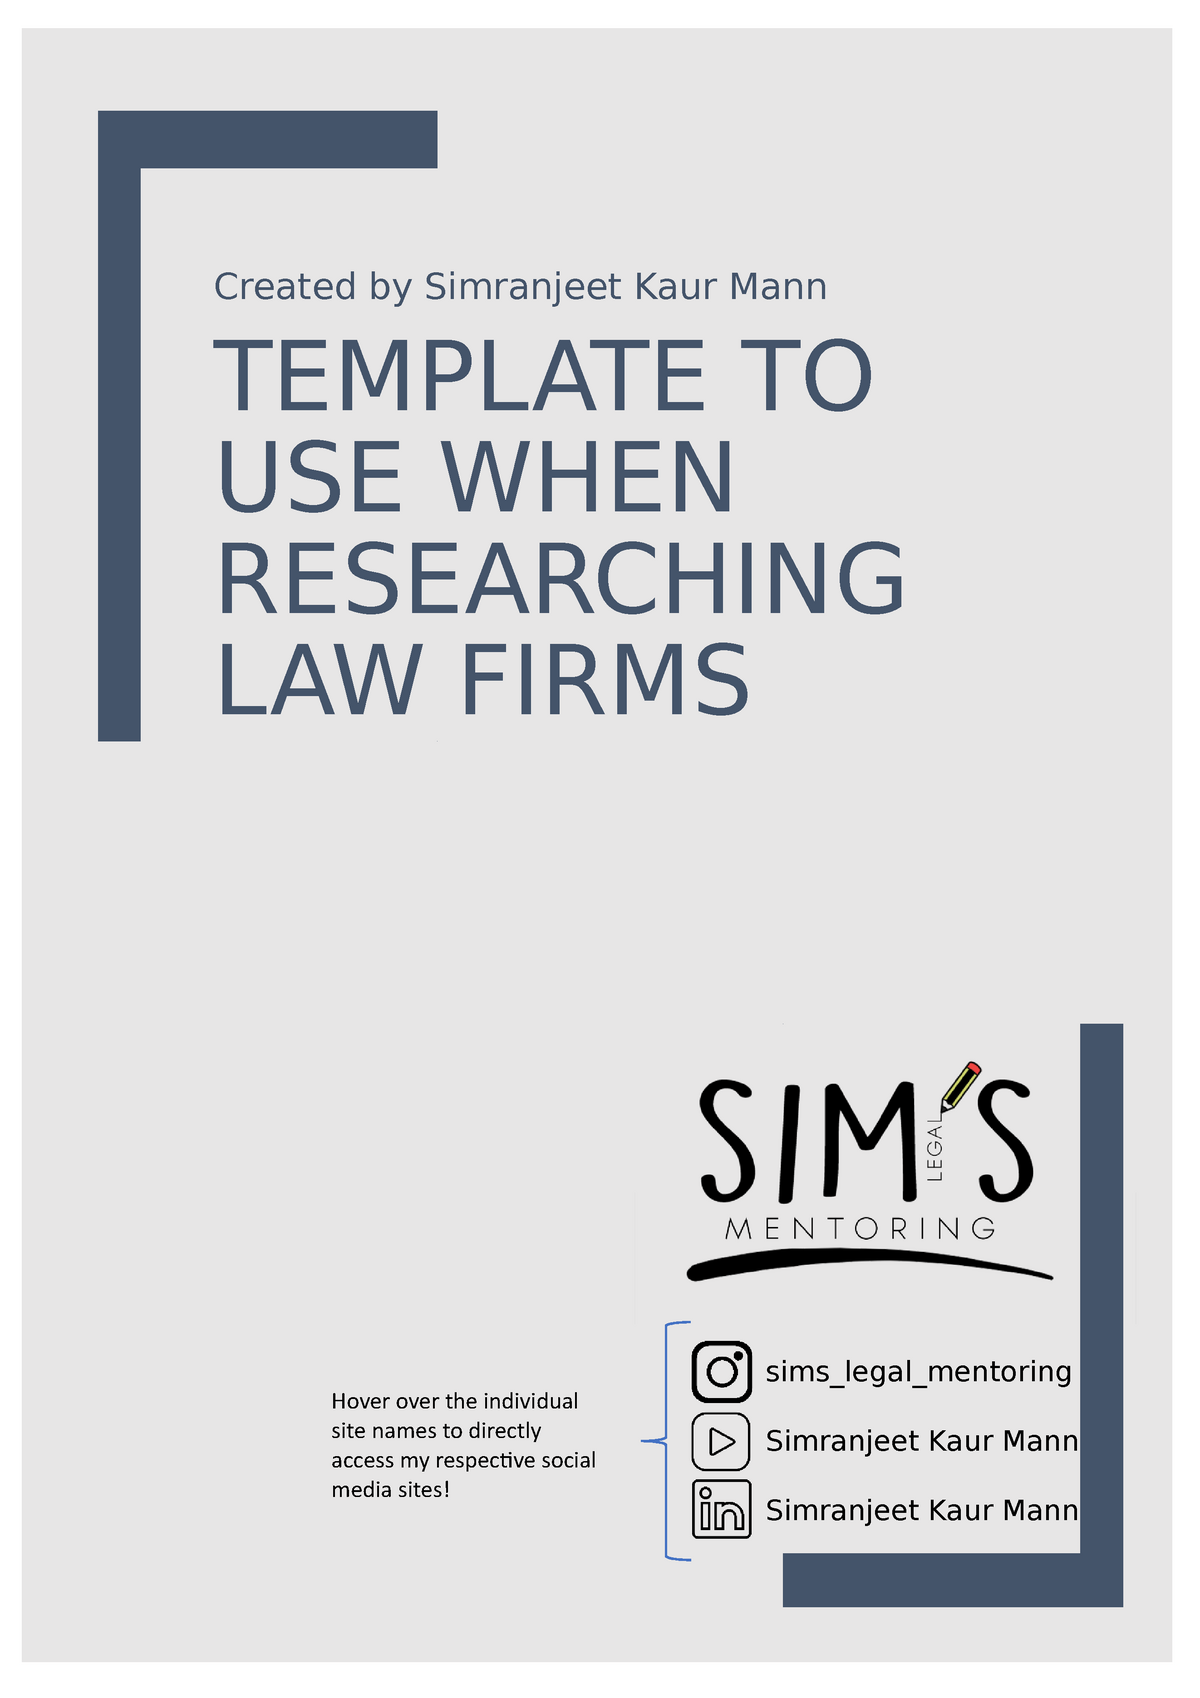 researching-template-for-law-firm-applications-envs204-liverpool